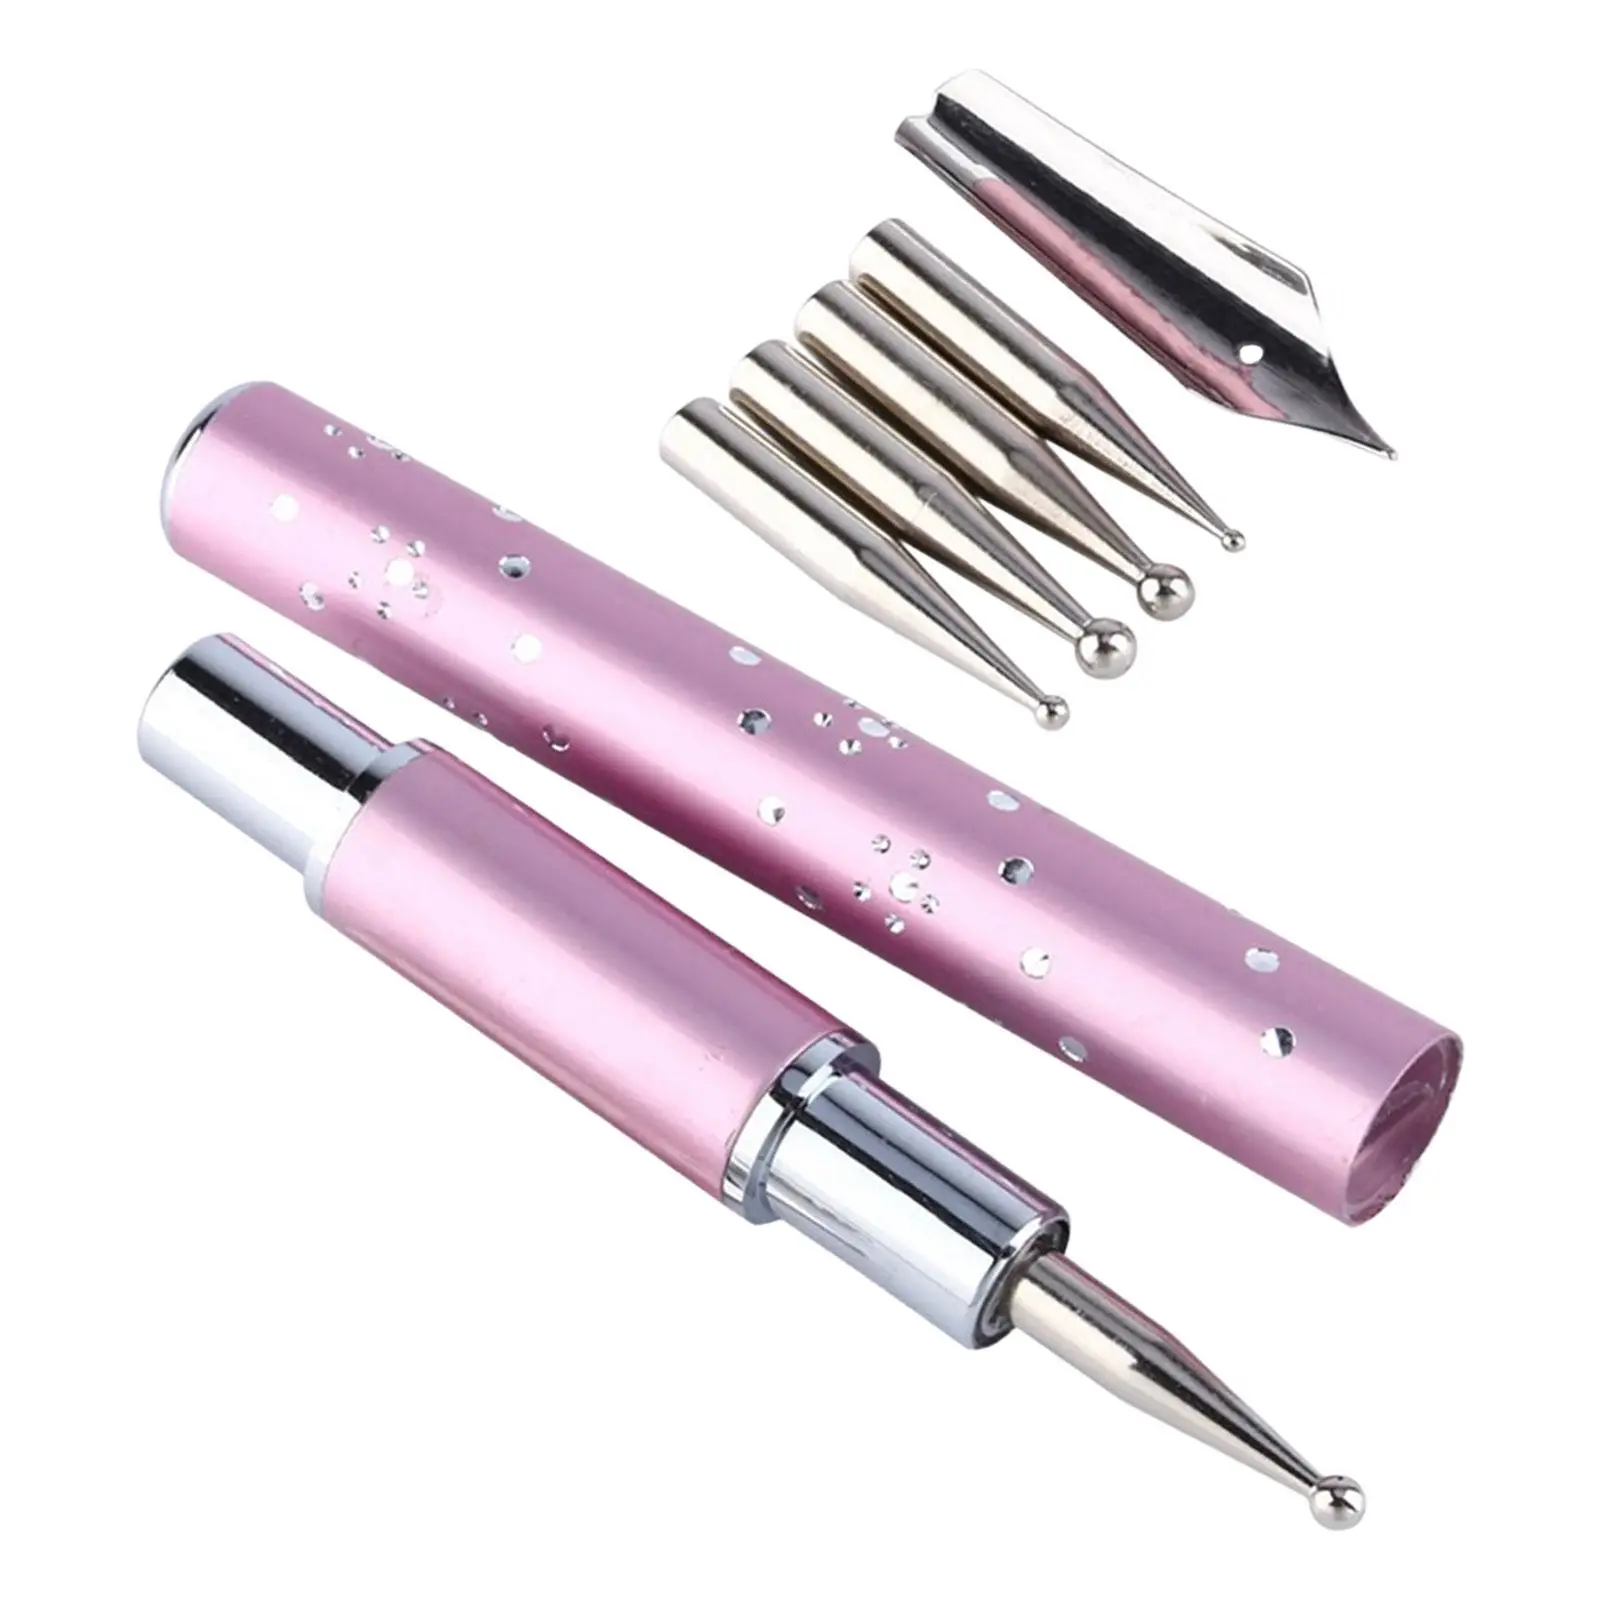 Nail Art Fountain Pen with 5 Replacement Heads Nail Art Paint Pen for Home